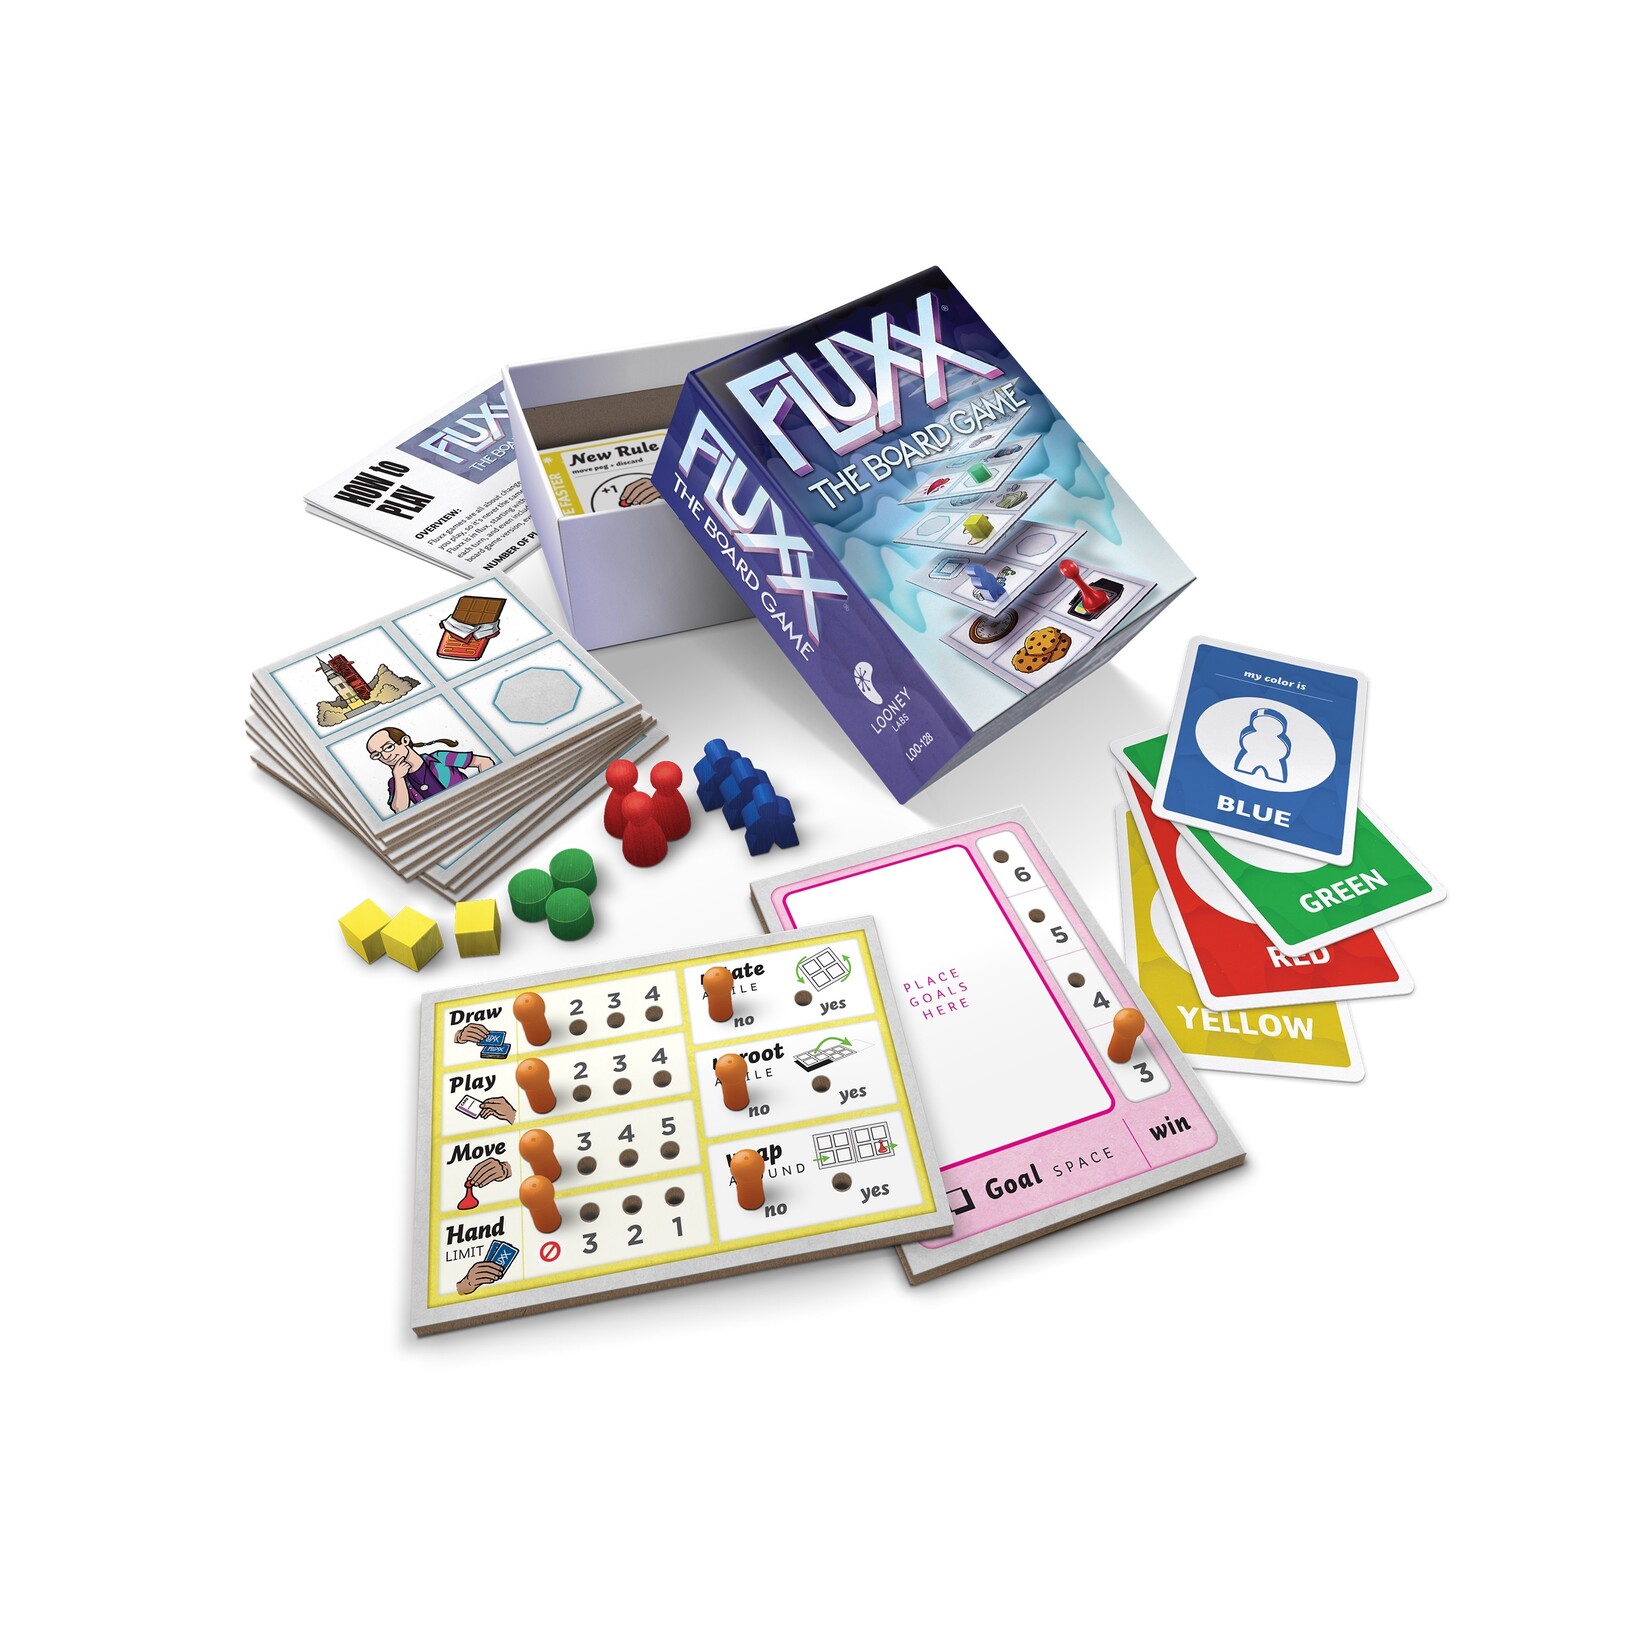 Looney Labs Fluxx - The boardgame (English)